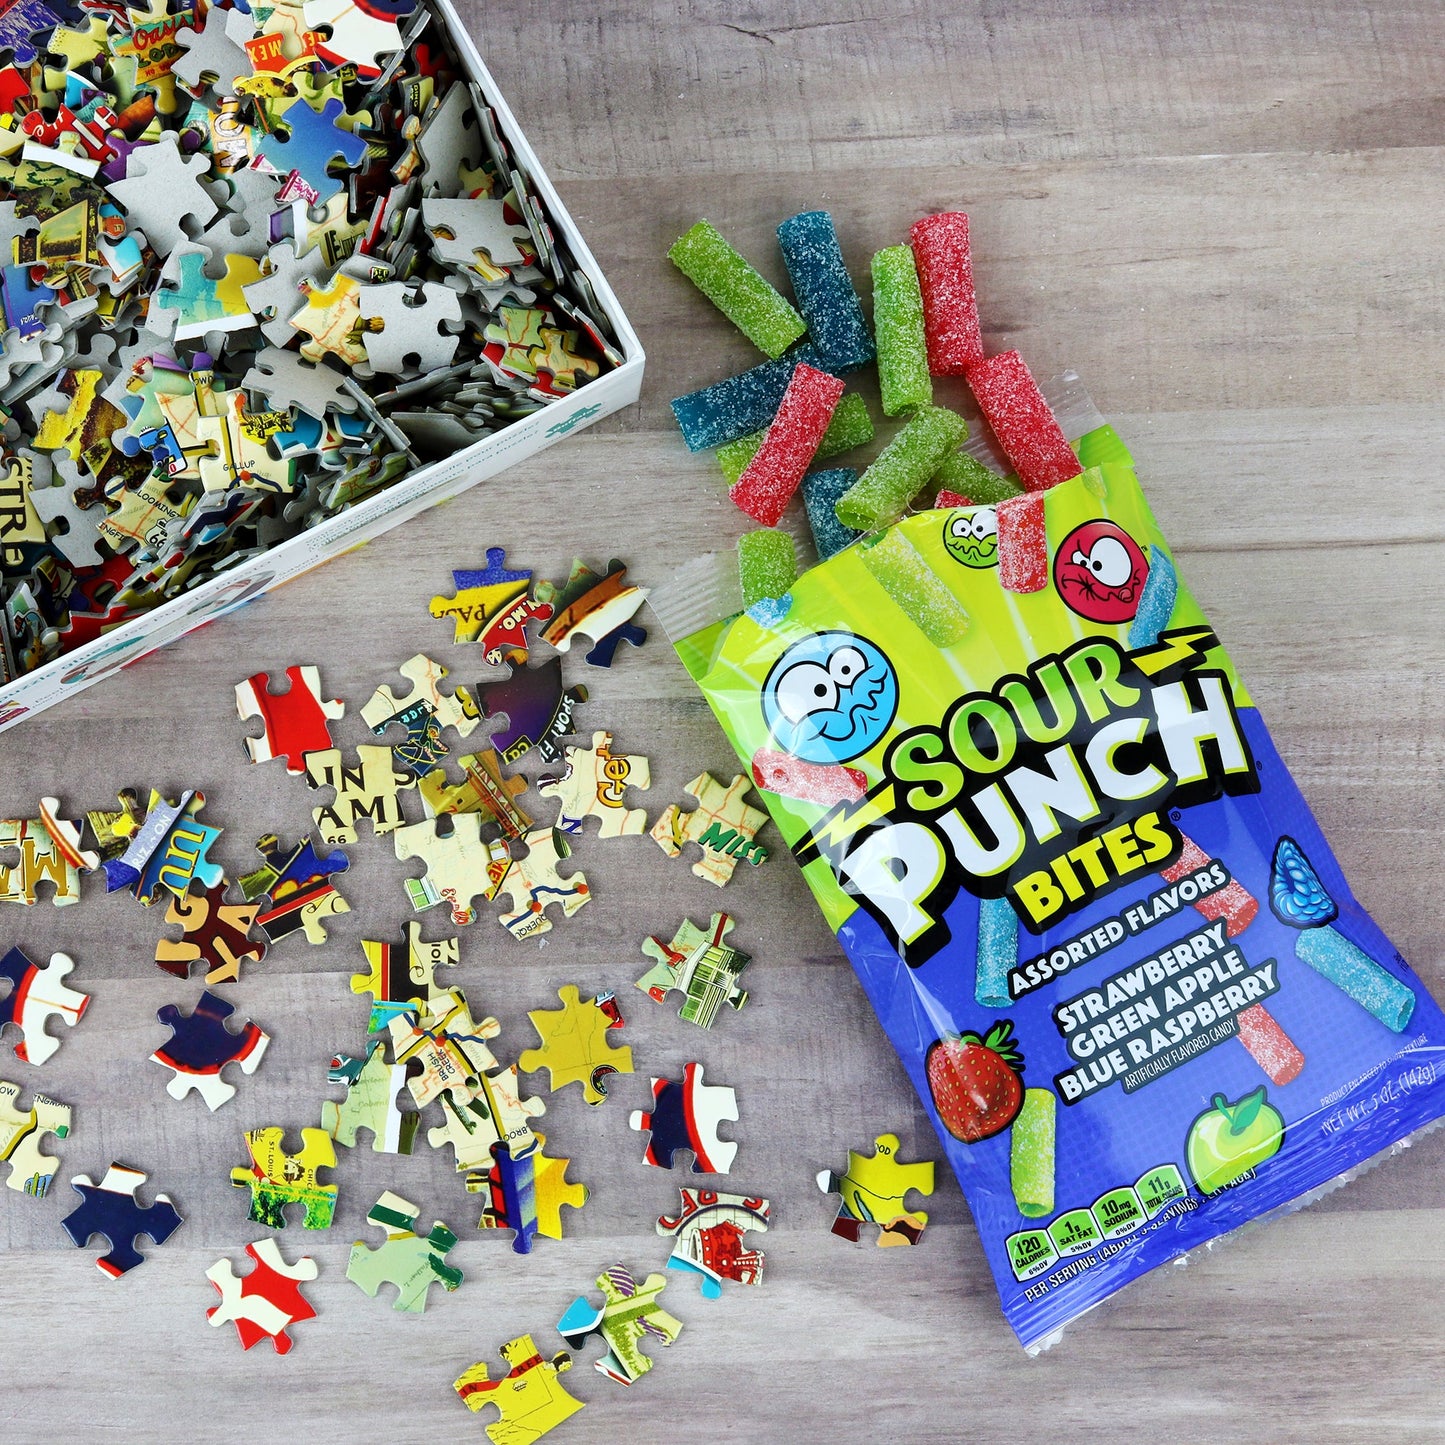 Putting together a puzzle while enjoying an open bag of Sour Punch Assorted Bites